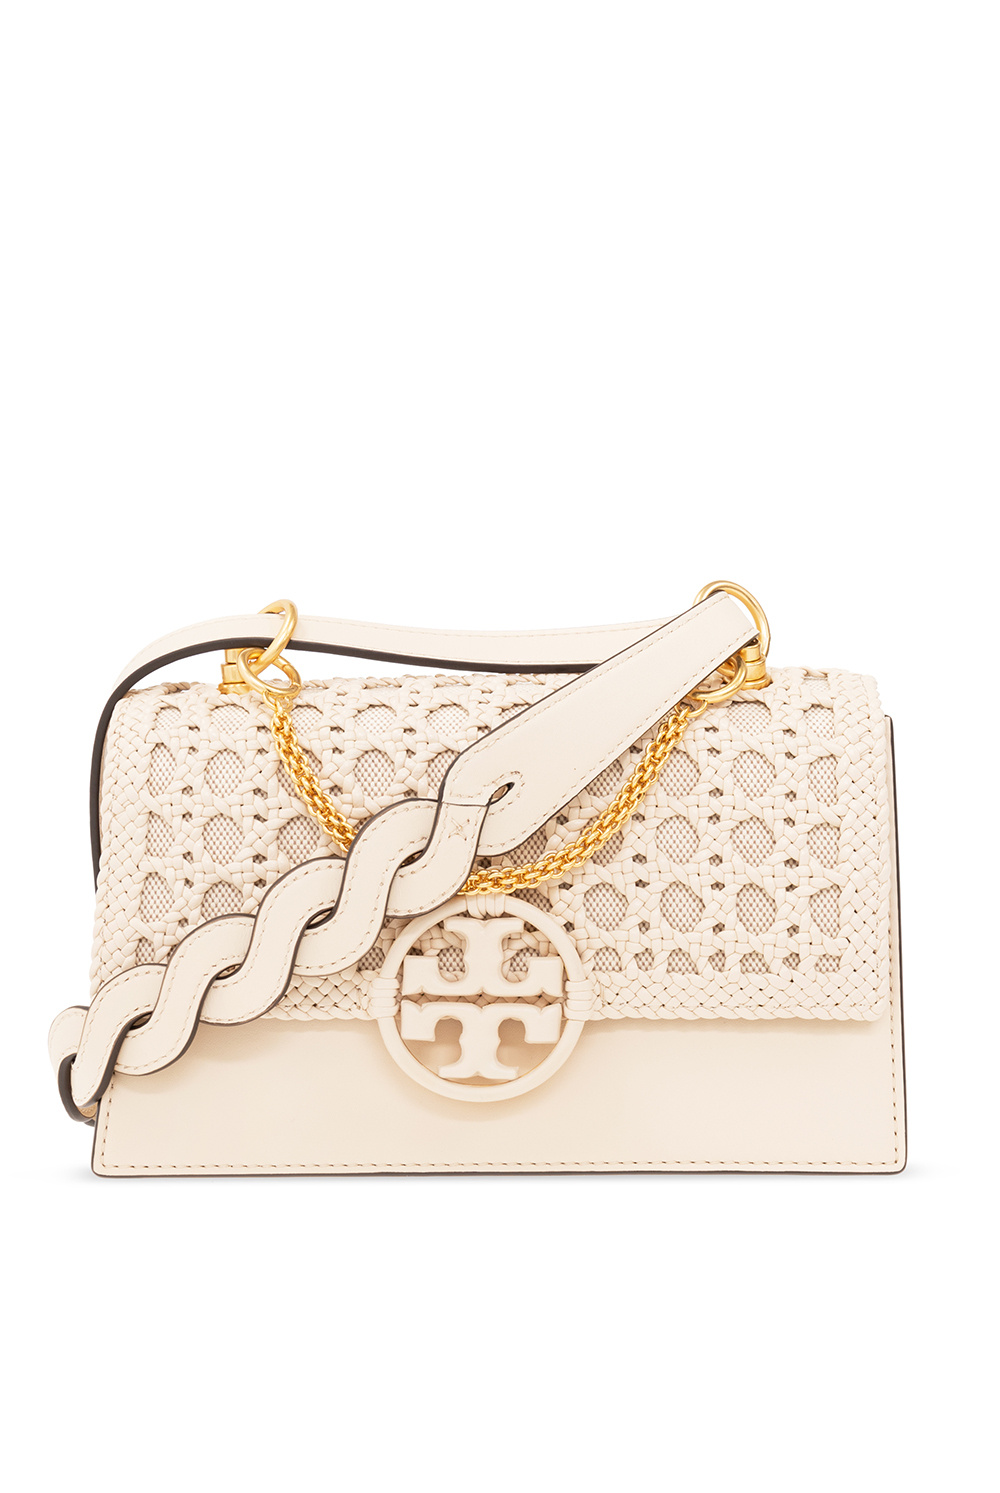 ON HAND🇺🇸 Tory Burch small emerson top zip shoulder bag 11,999